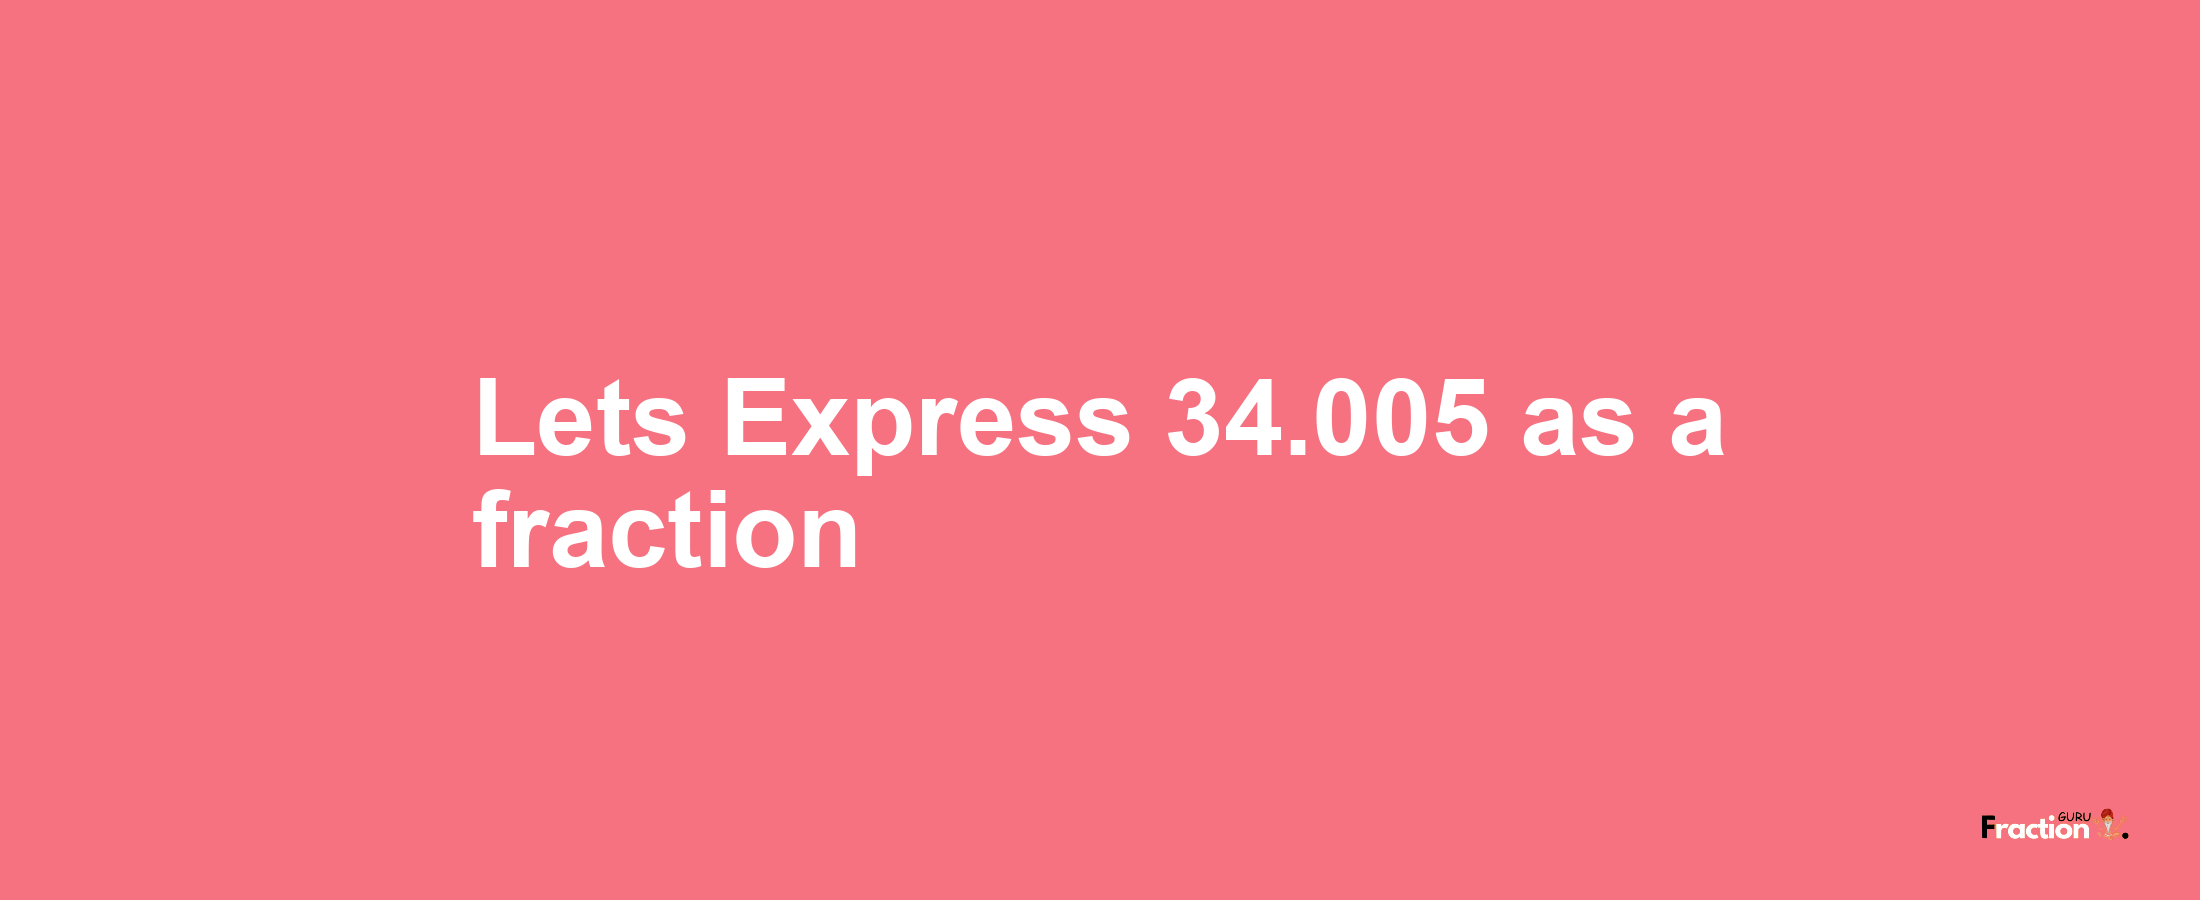 Lets Express 34.005 as afraction